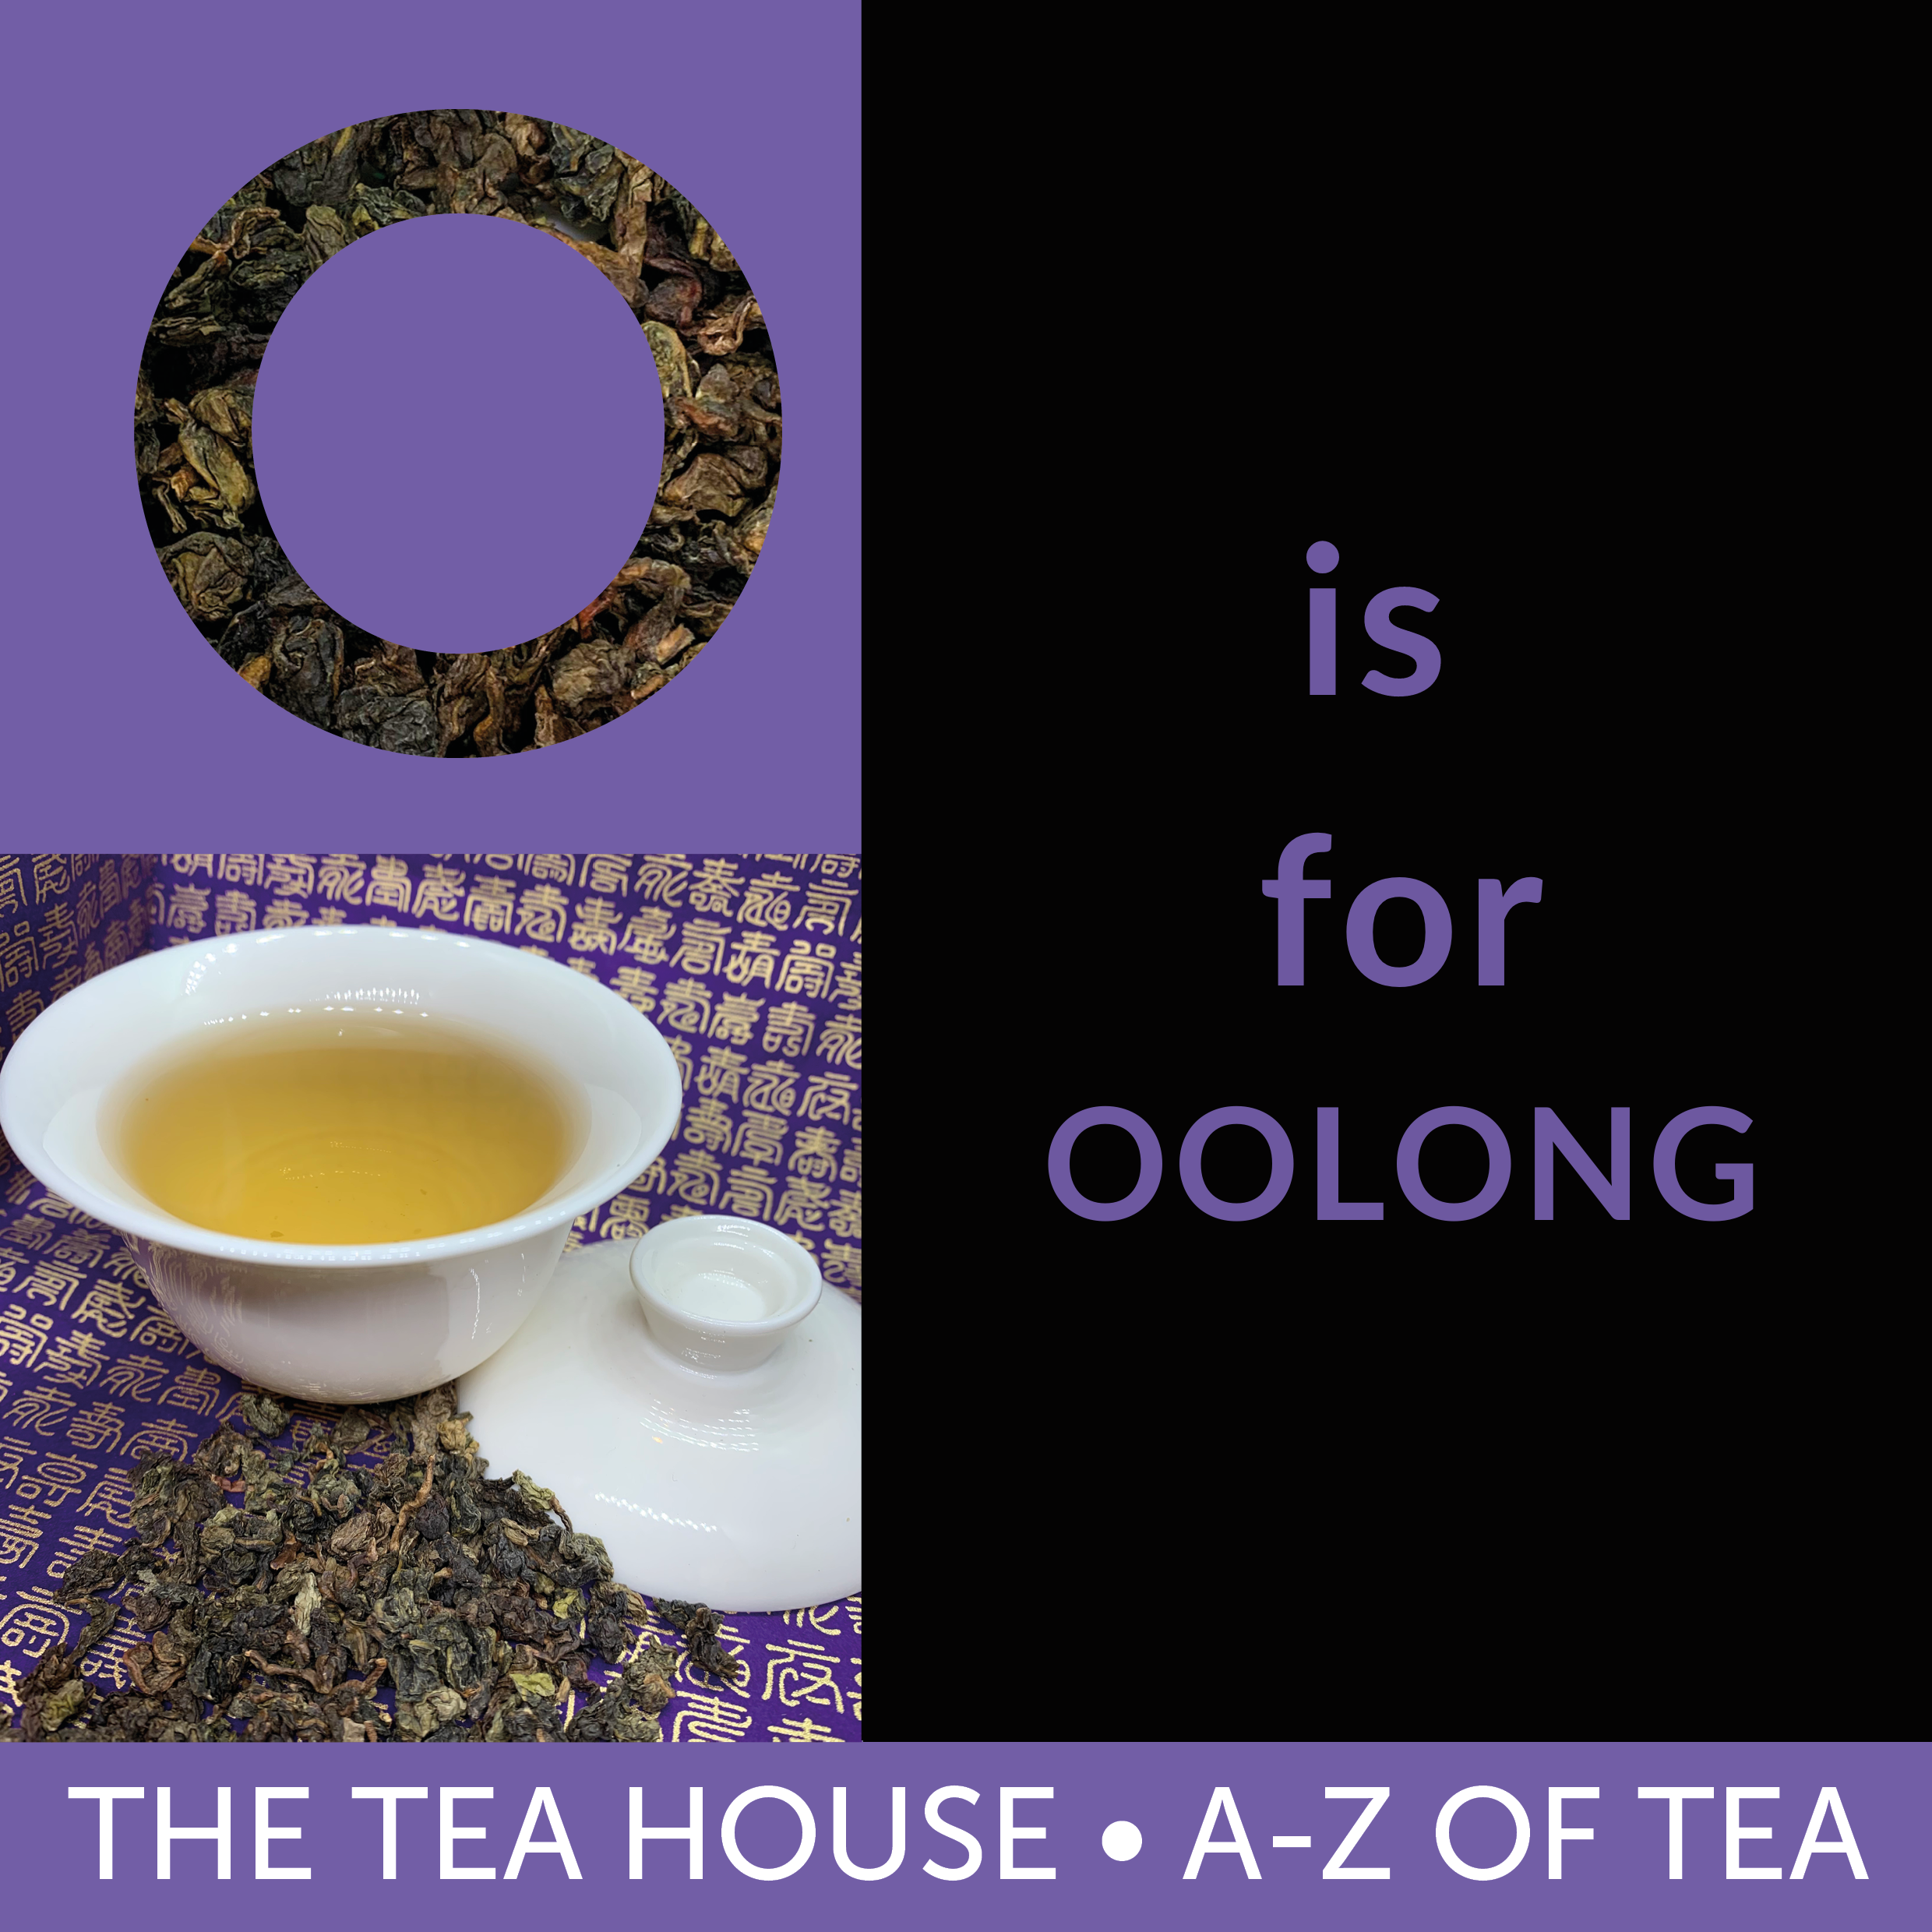 O is for Oolong